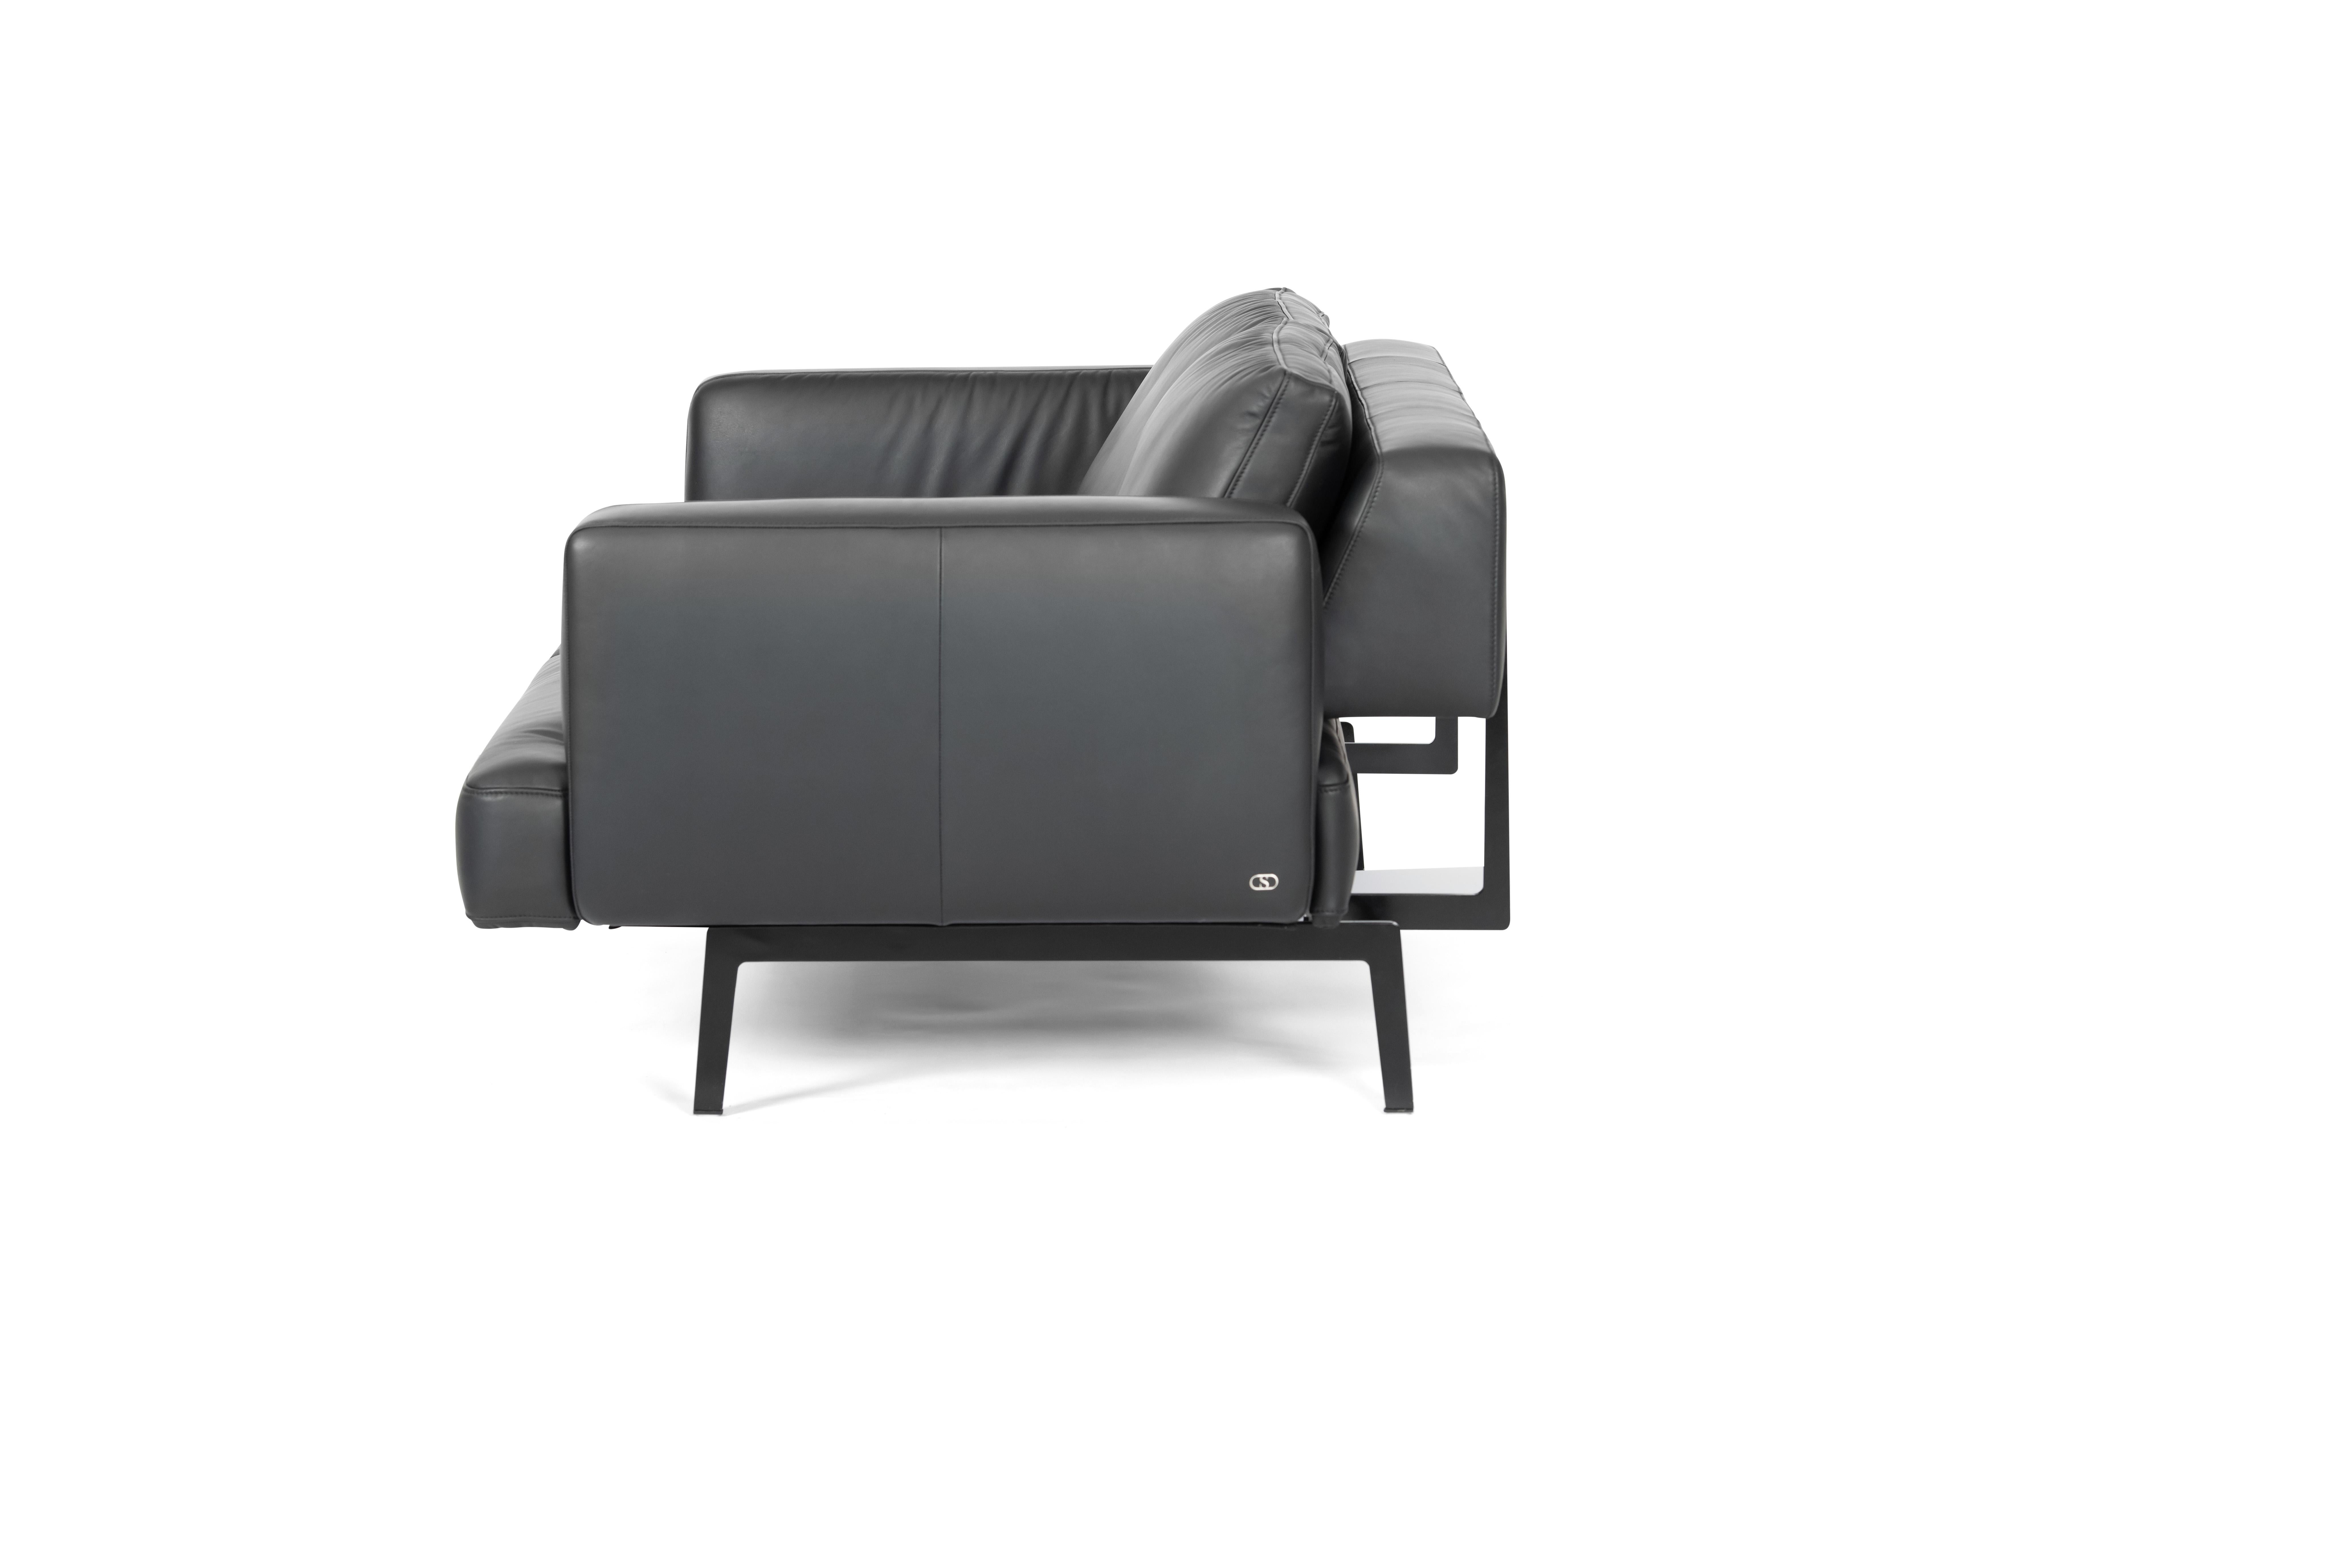 DeSede DS-747/02 Multifunctional Sofa in Black Leather Seat and Back Upholstery For Sale 1